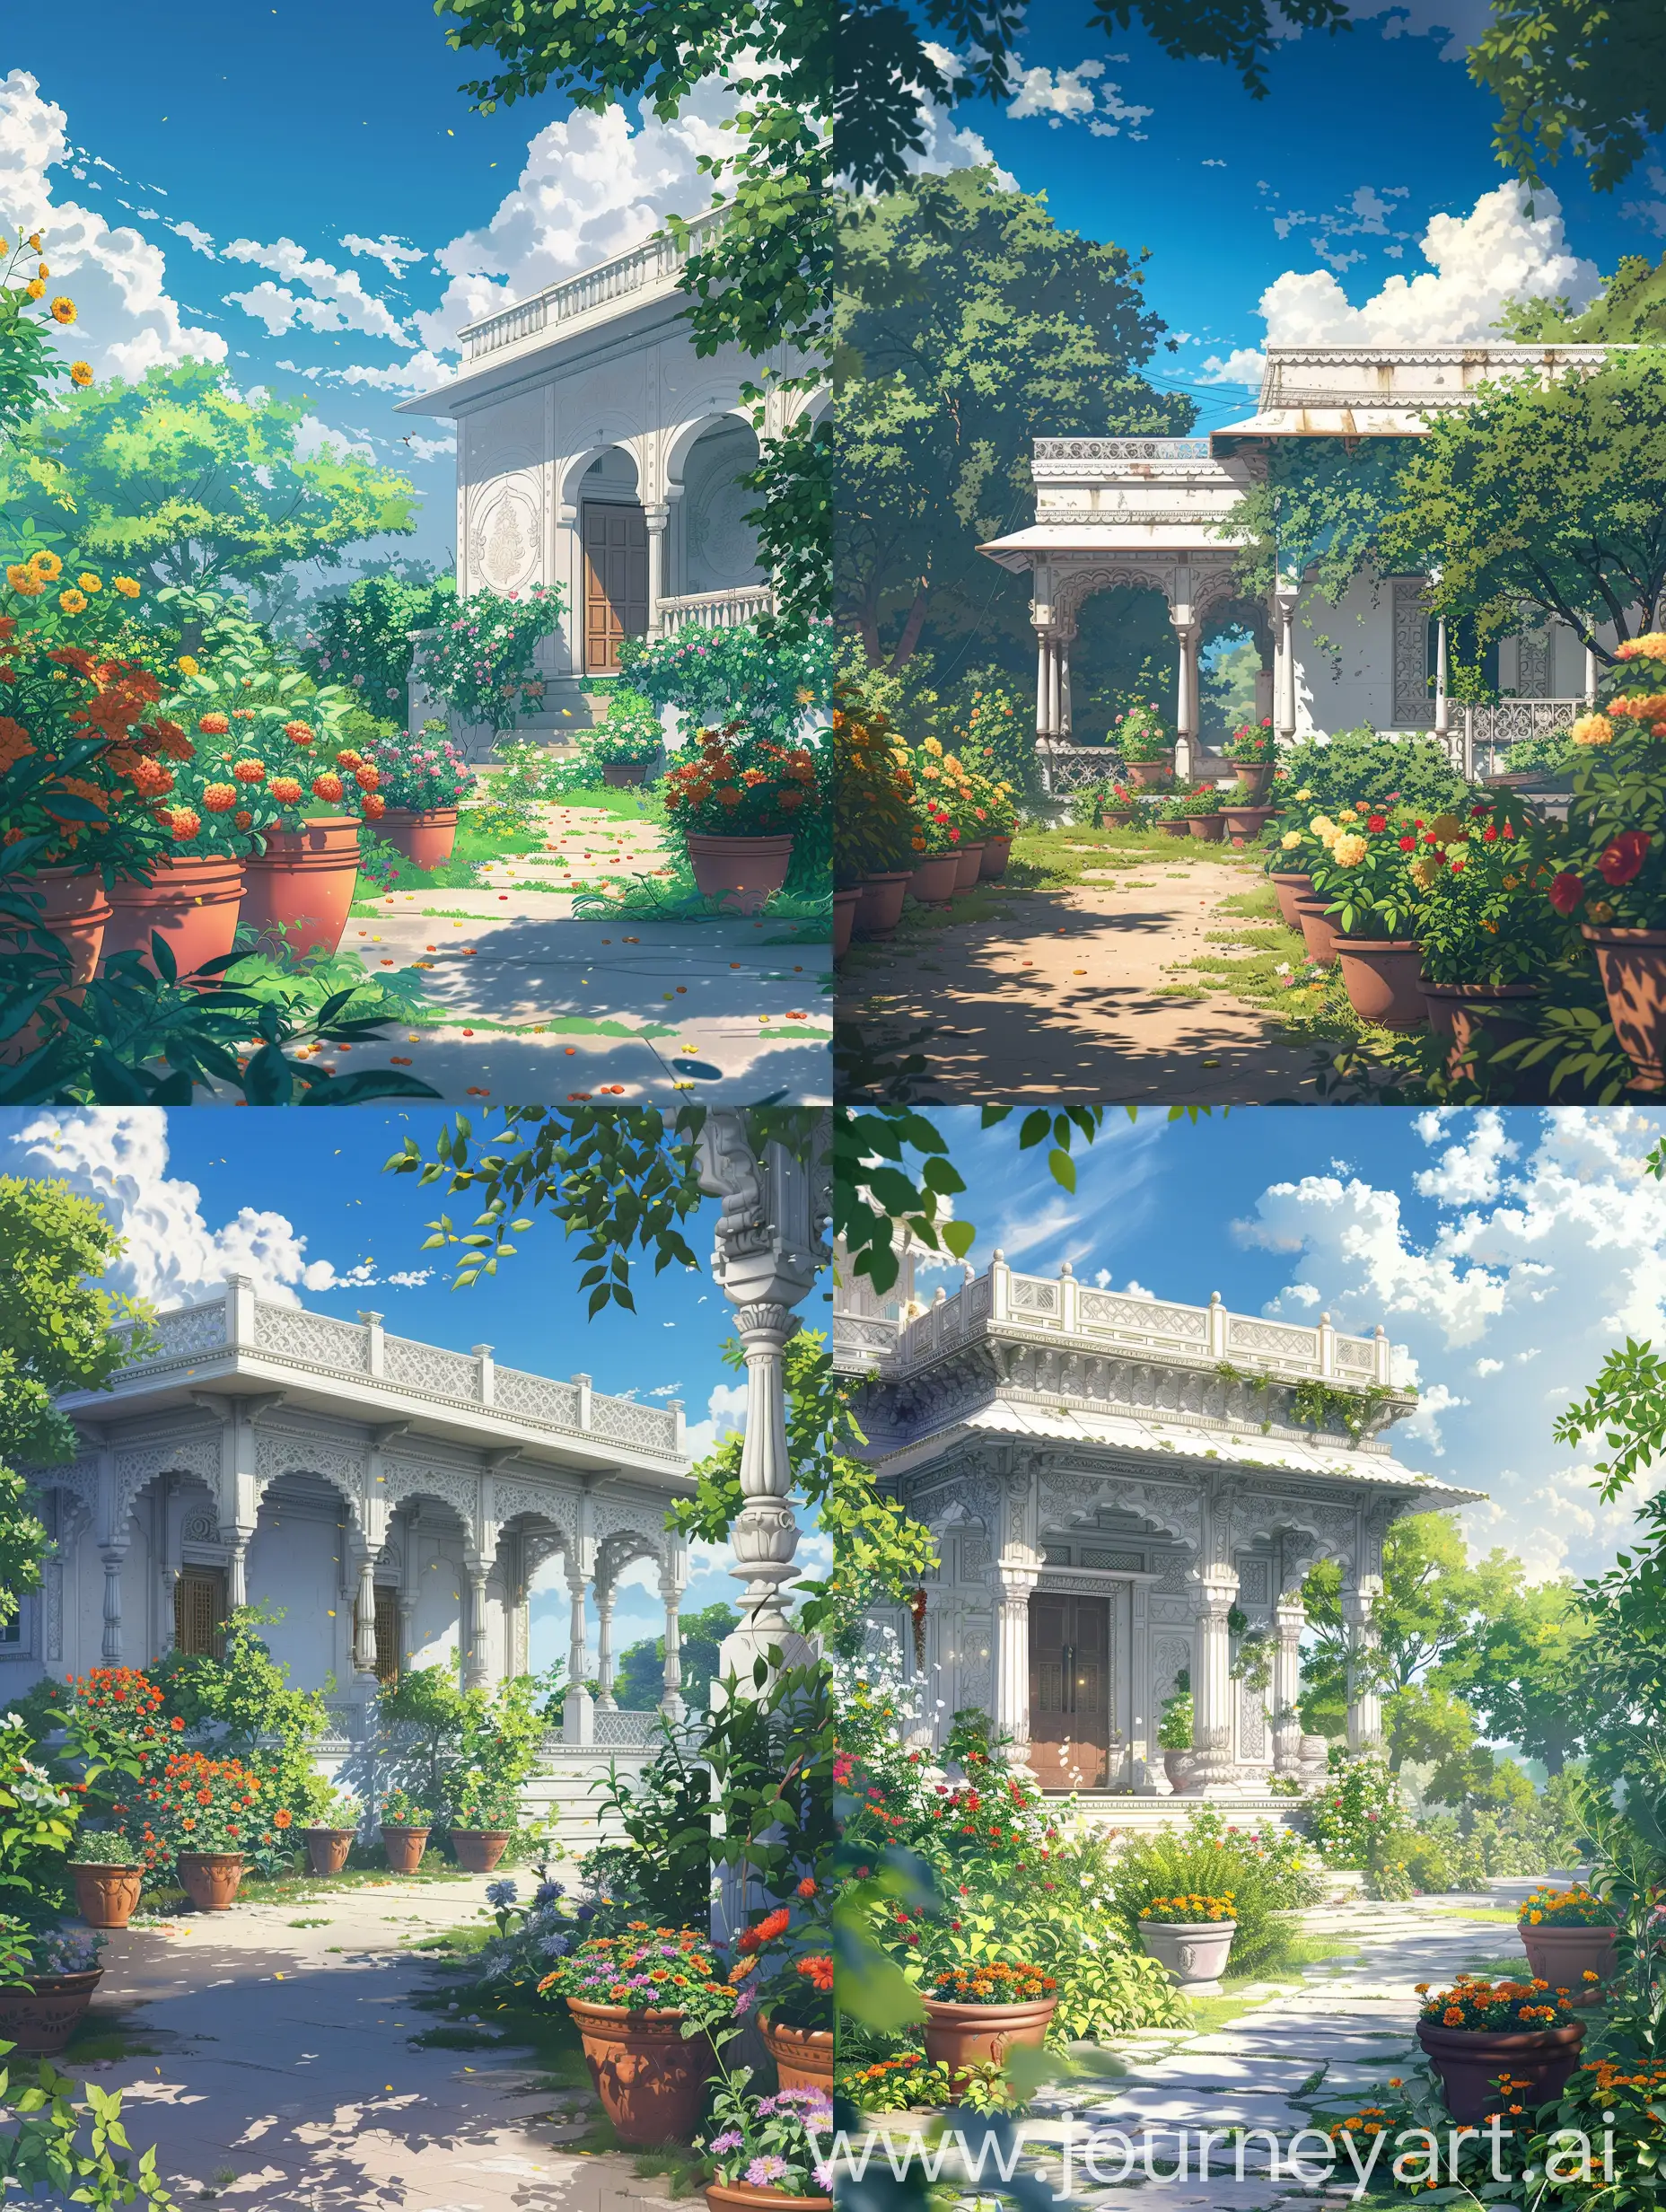 Beautiful anime style,Makoto Shinkai style with a mix of Studio Ghibli,an elegant Indian-style house stands proudly amidst a landscape of serene beauty. Its whitewashed walls adorned with intricate designs, and vibrant flower pots and planters line the front, adding bursts of color to the inviting facade. The scent of jasmine and marigolds fills the air, enhancing the warm, nostalgic atmosphere.

Above, the sky stretches expansively in a flawless shade of azure, adorned with wisps of fluffy clouds that drift lazily by. The gentle warmth of the summer sun bathes the scene in a golden glow, casting long shadows that dance across the lush greenery.

Every detail of the scene is meticulously crafted, from the delicate patterns adorning the house to the intricate designs of the flower pots. Each leaf, each petal, is rendered with precision, infusing the scene with a sense of high detailing and perfection.

A small path winds its way through the garden, leading to the entrance of the house. The path, lined with colorful blooms and shaded by overhanging branches, invites you to take a leisurely stroll and soak in the tranquility of the surroundings.

As you gaze upon this idyllic scene, a wave of nostalgia washes over you, transporting you to a simpler time filled with warmth and contentment. It's a scene that captures the essence of Indian hospitality and the timeless beauty of a summer day.